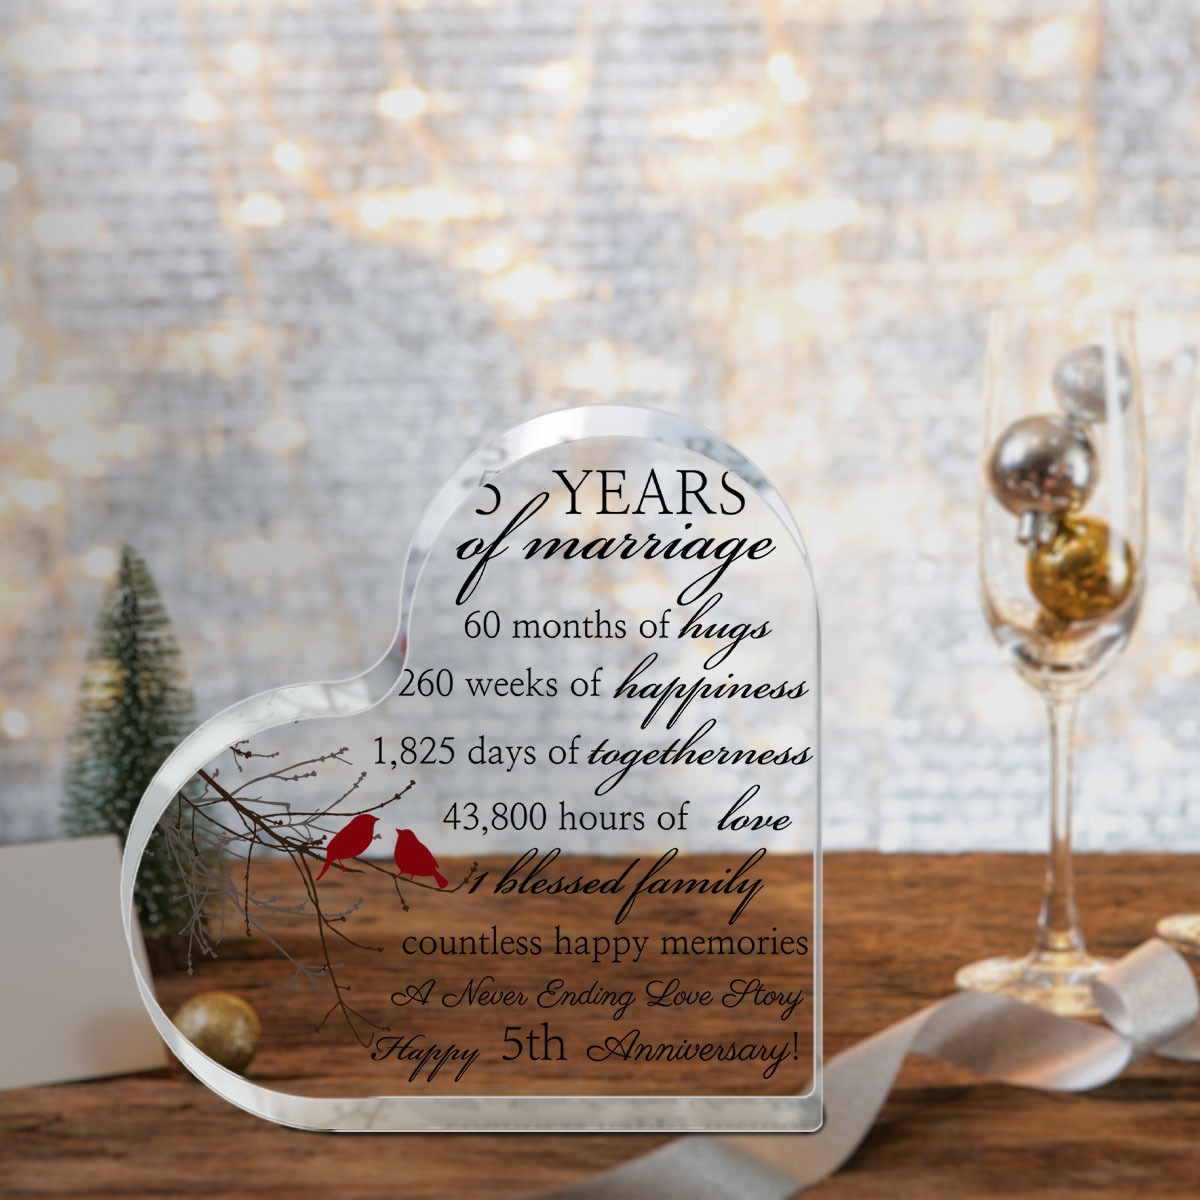 Marriage Anniversary Wedding Gifts for Women, Happy 60th Anniversary  Wedding Gifts for Husband Wife Friends, 60 Years of Marriage Gift Keepsake  Heart